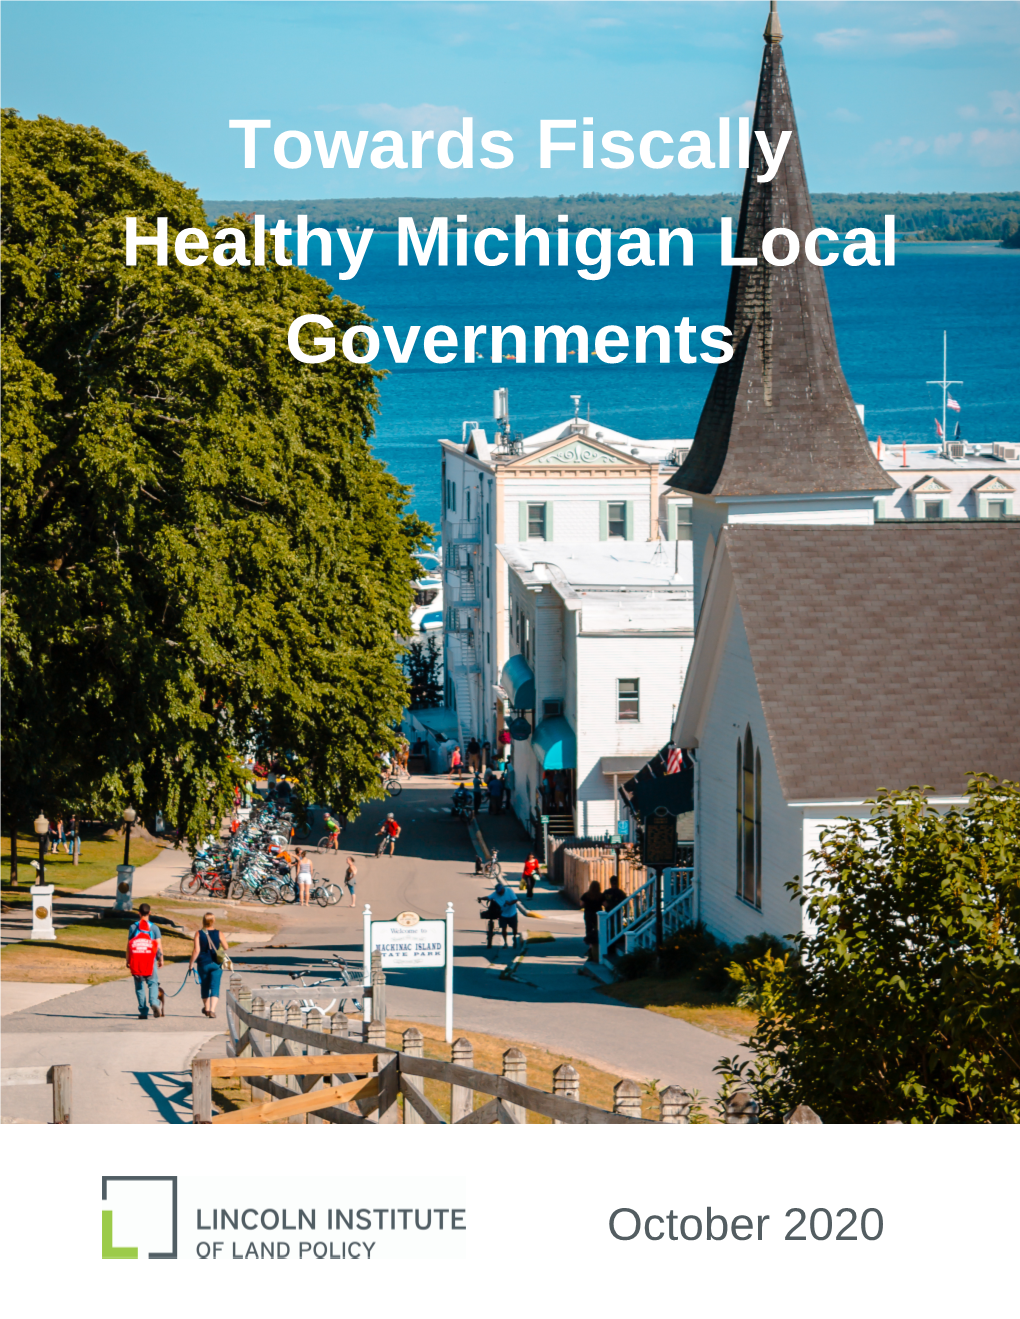 Towards Fiscally Healthy Michigan Local Governments